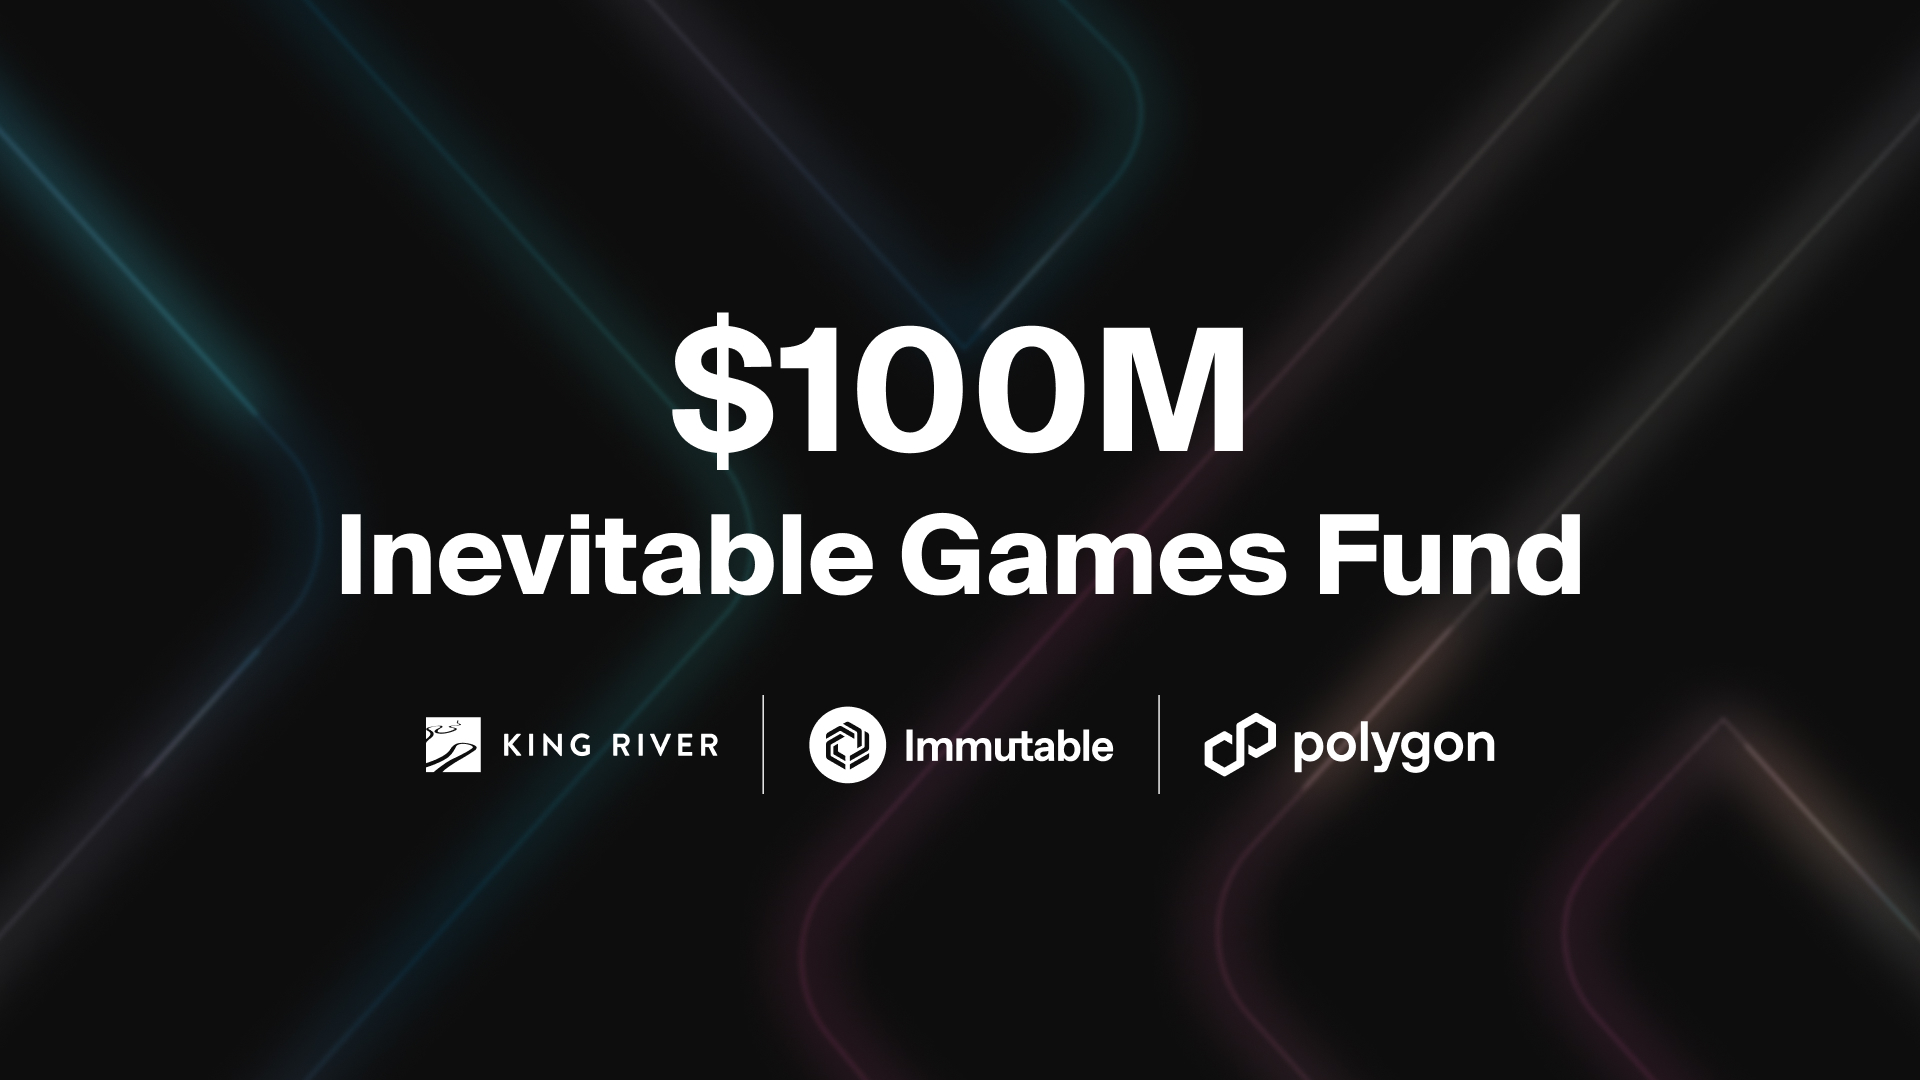 King River Capital, Immutable, and Polygon Labs have teamed up to launch the $100M Inevitable Games Fund (IGF